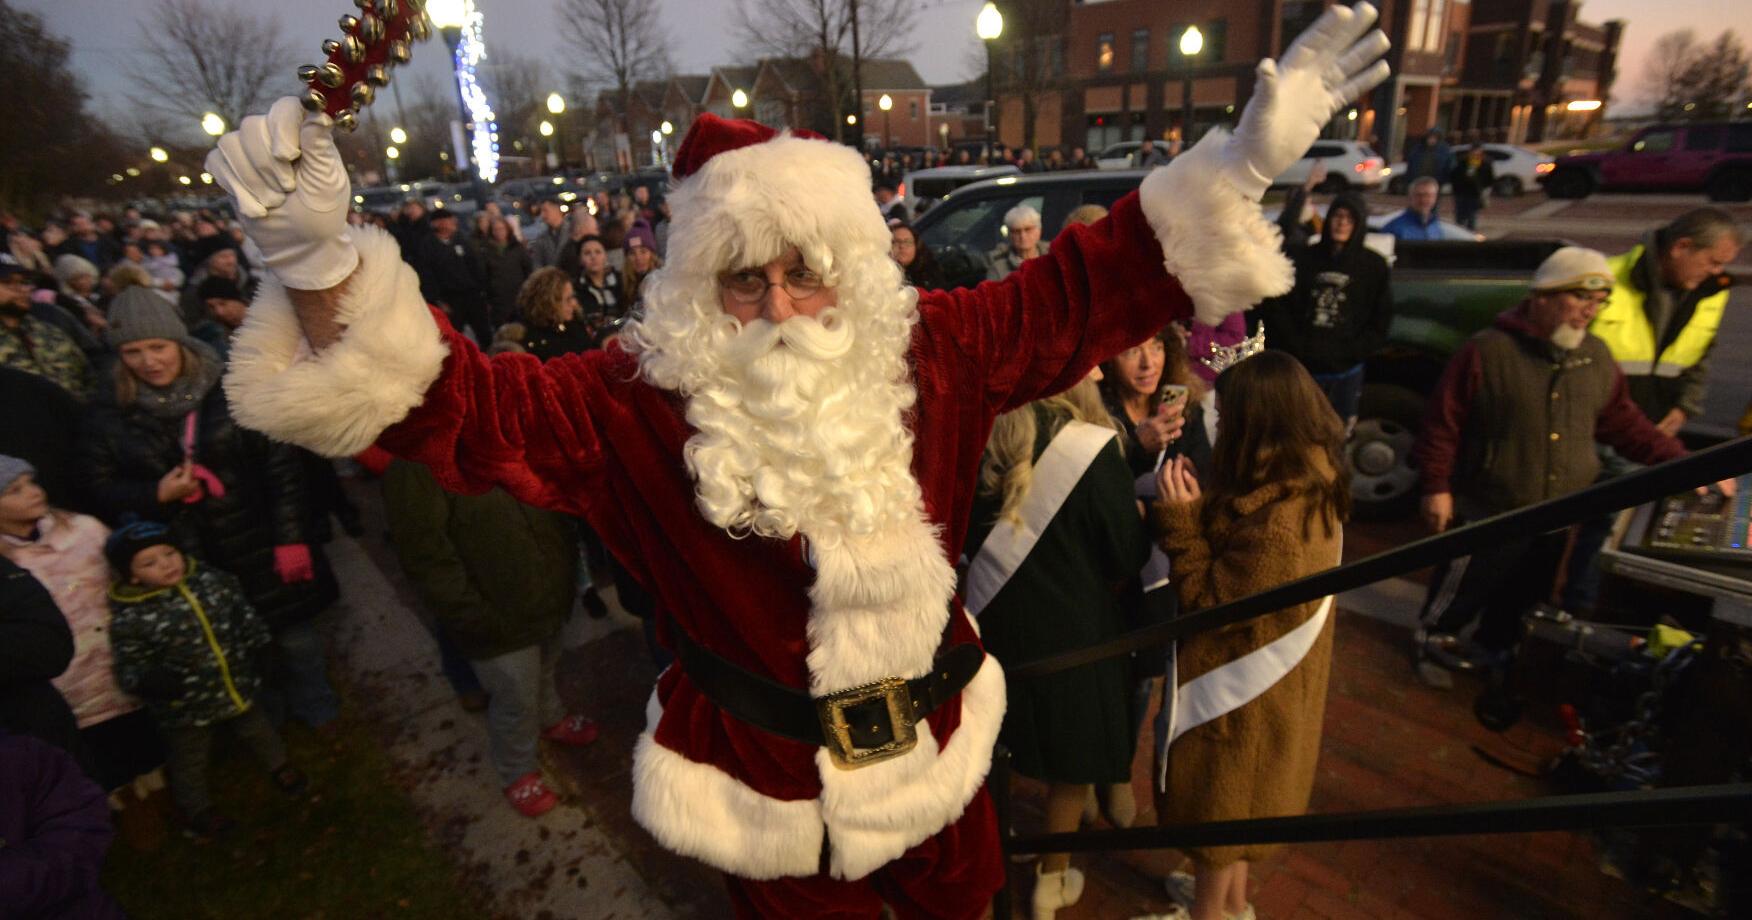 Thousands descend upon Downtown Kenosha for annual Christmas tree lighting, special holiday kickoff